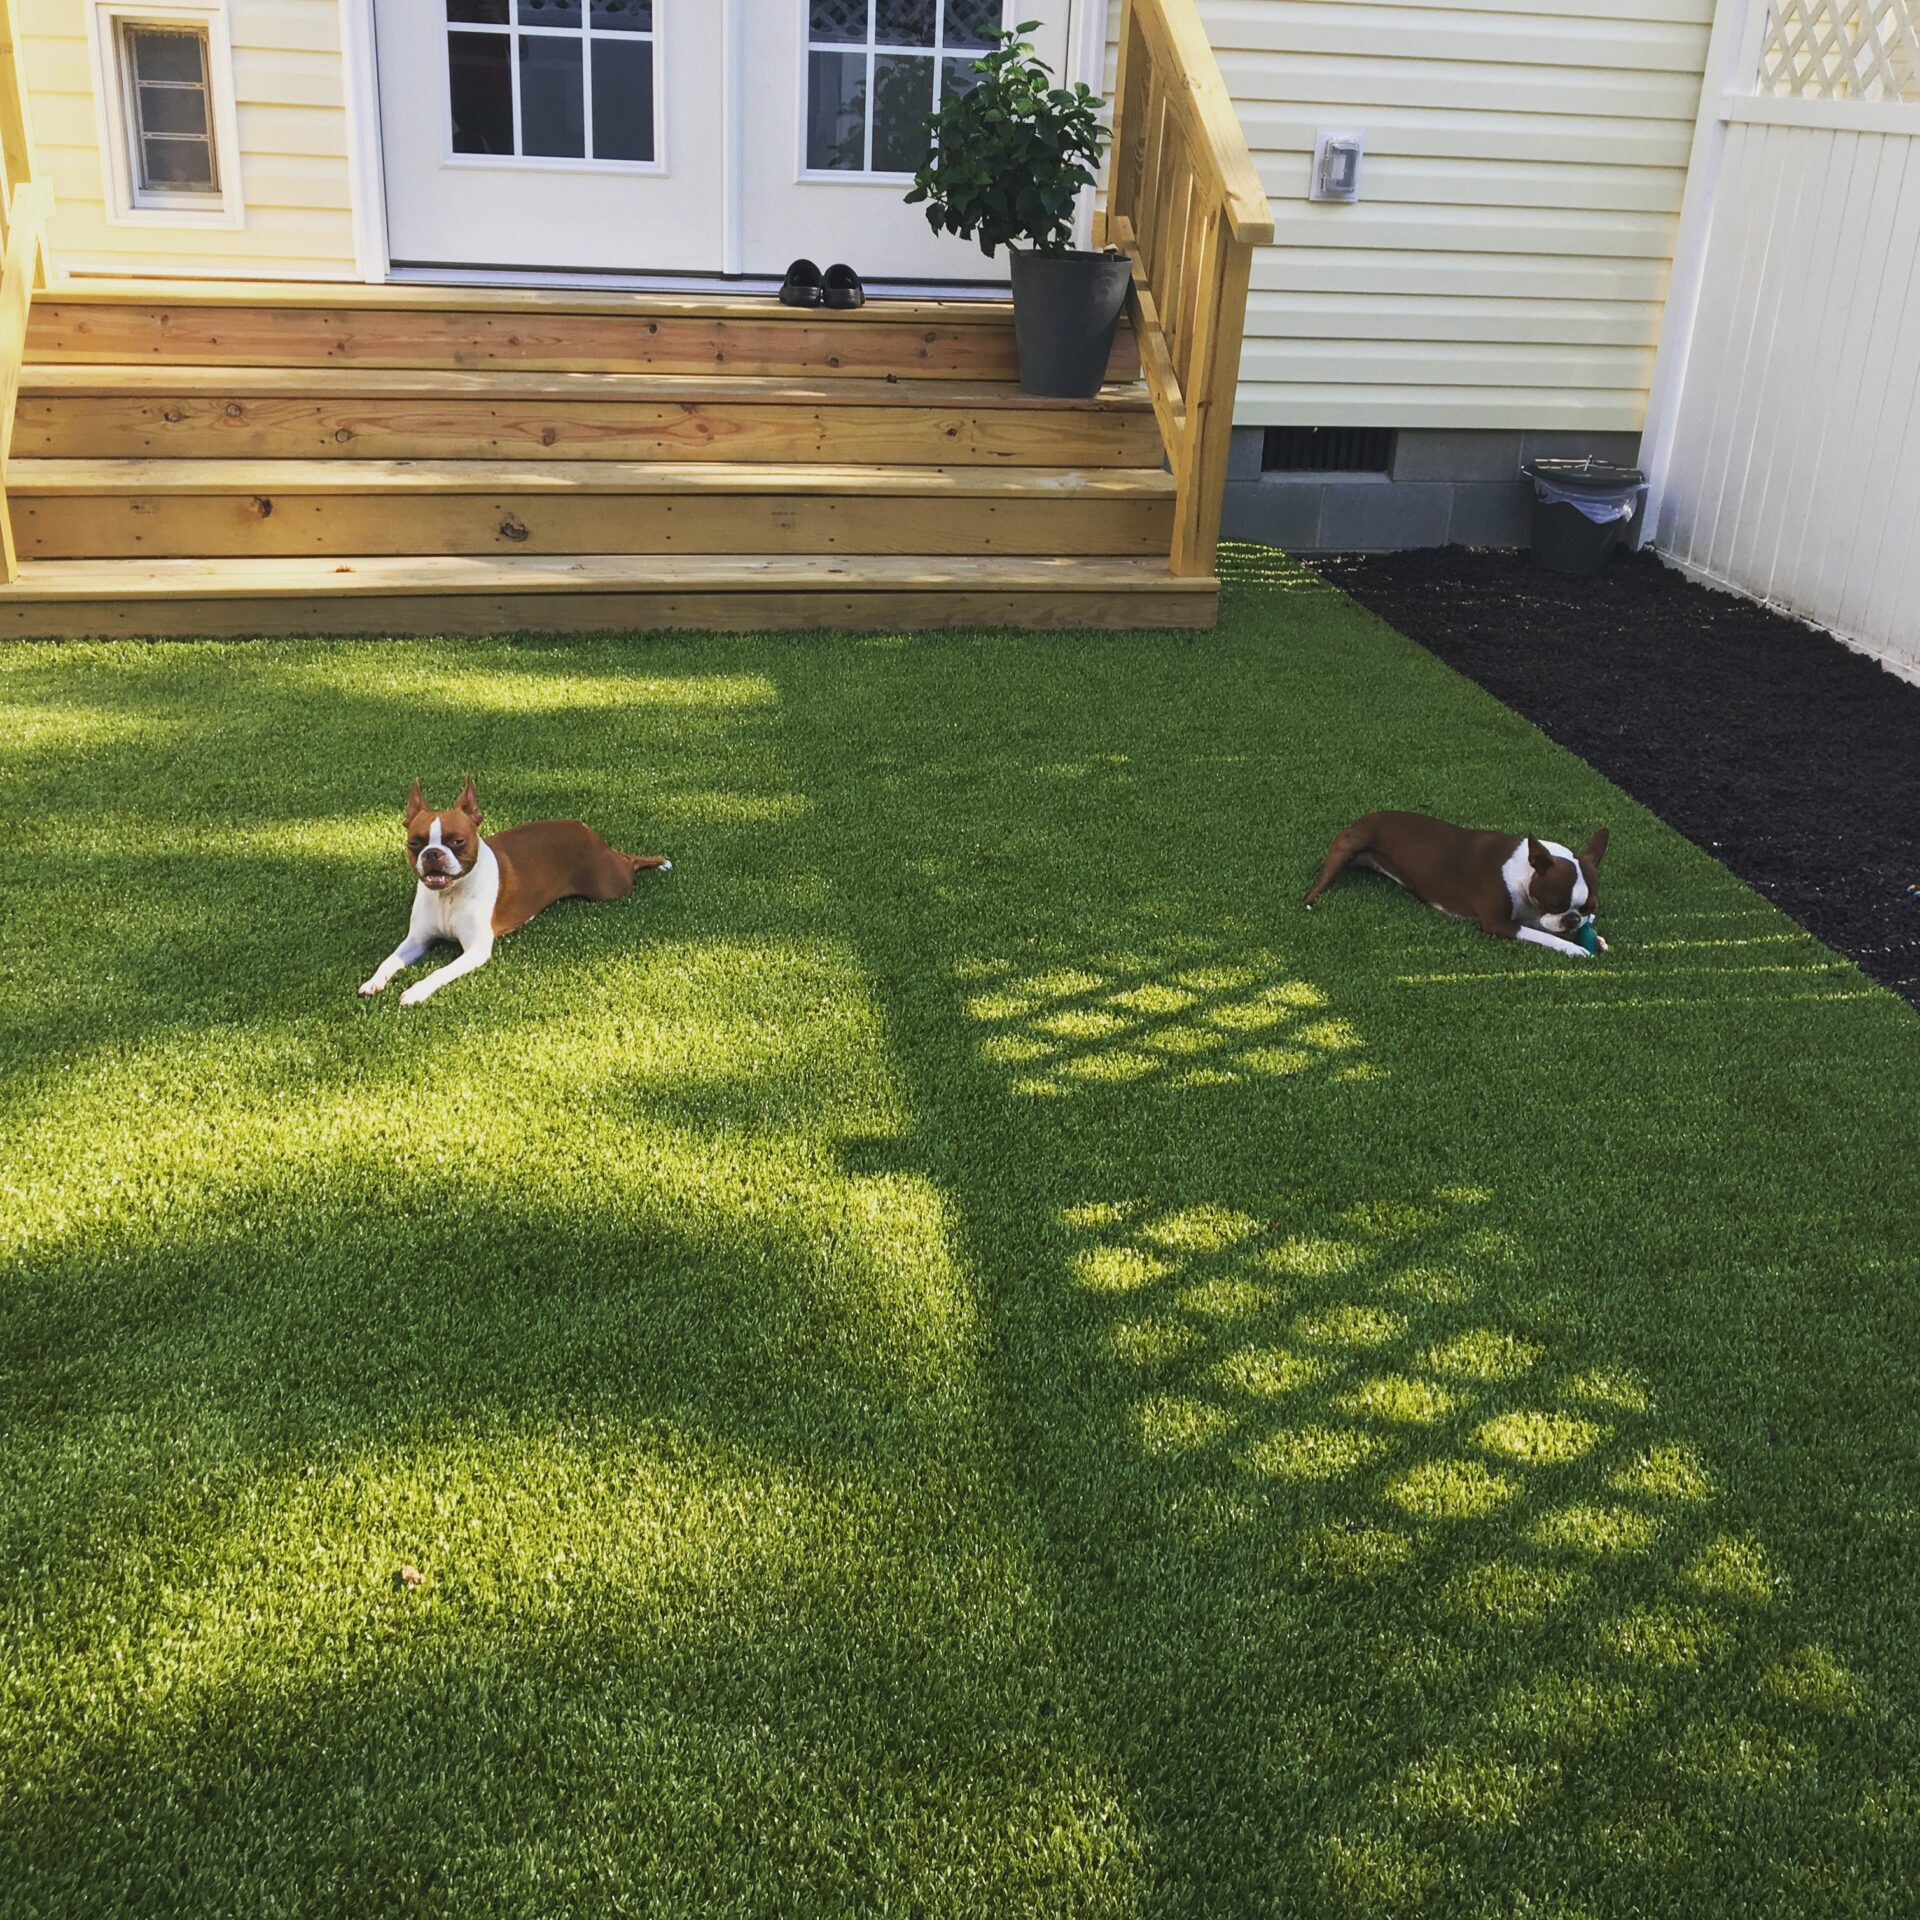 Two dogs lie on artificial grass in a sunny backyard with a wooden deck and potted plant. The scene is cozy and residential.